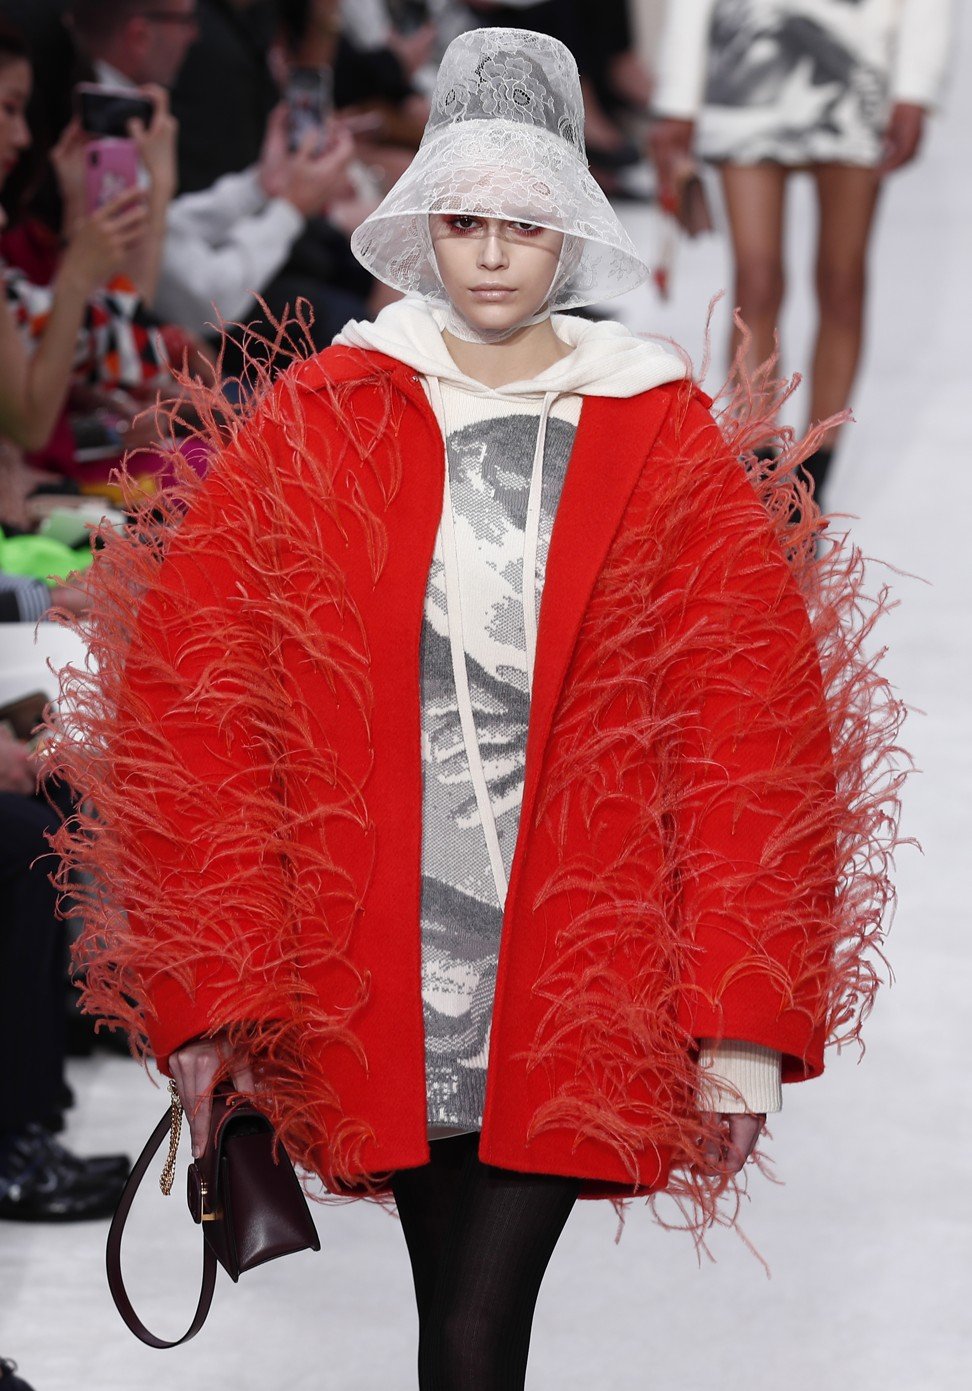 Paris Fashion Week: the 5 biggest trends from the runway | South China ...